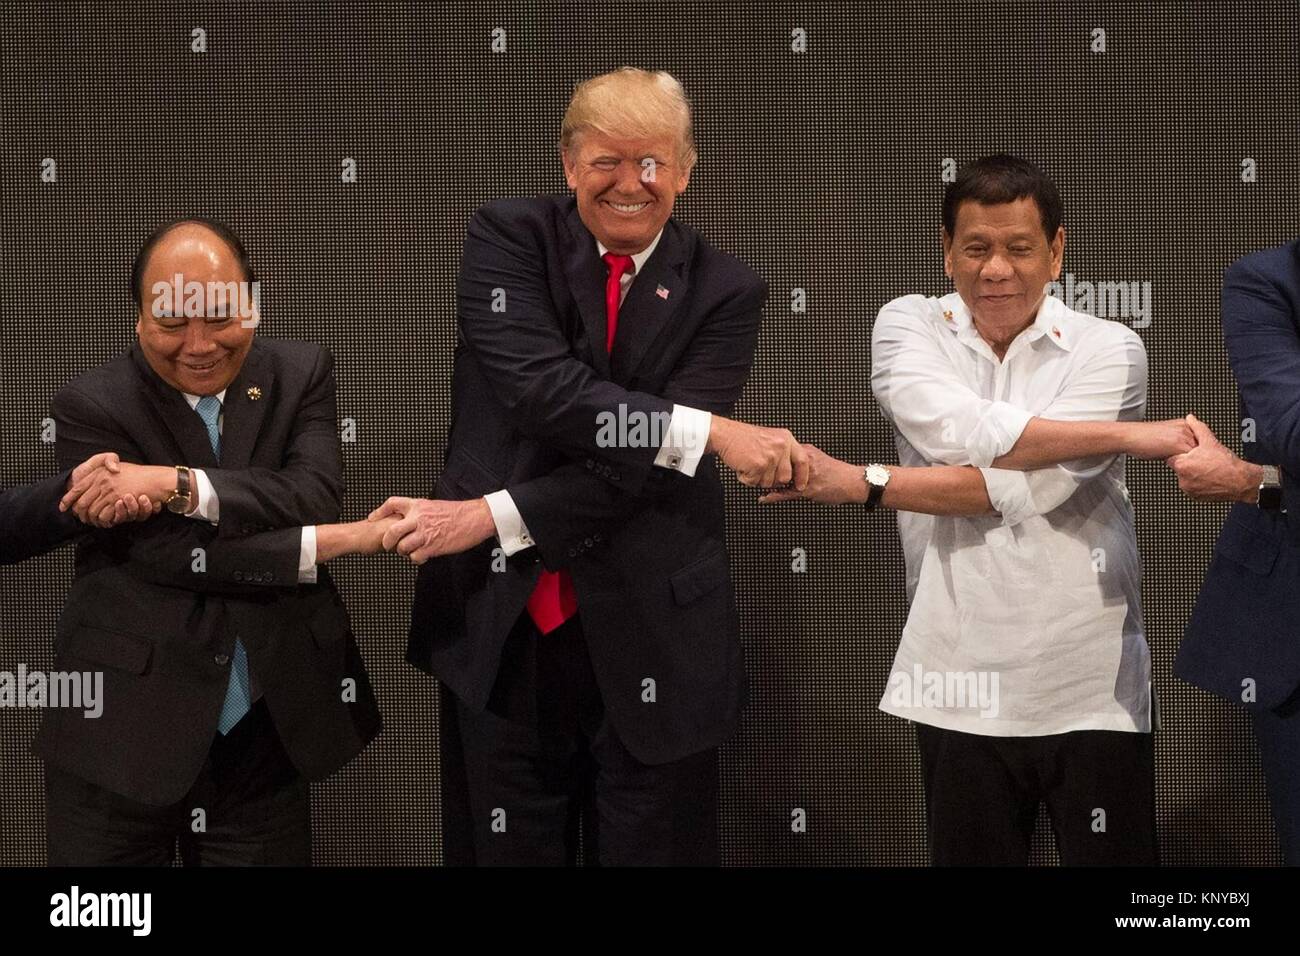 U.S. President Donald Trump, center, holds hands with Philippine President Rodrigo Duterte, right, and Vietnamese Prime Minister Nguyen Xuan Phuc, during the leaders group photo for the opening ceremony of the ASEAN Summit at the Philippine International Convention Center November 13, 2017 in Pasay City, Manila, Philippines. Stock Photo